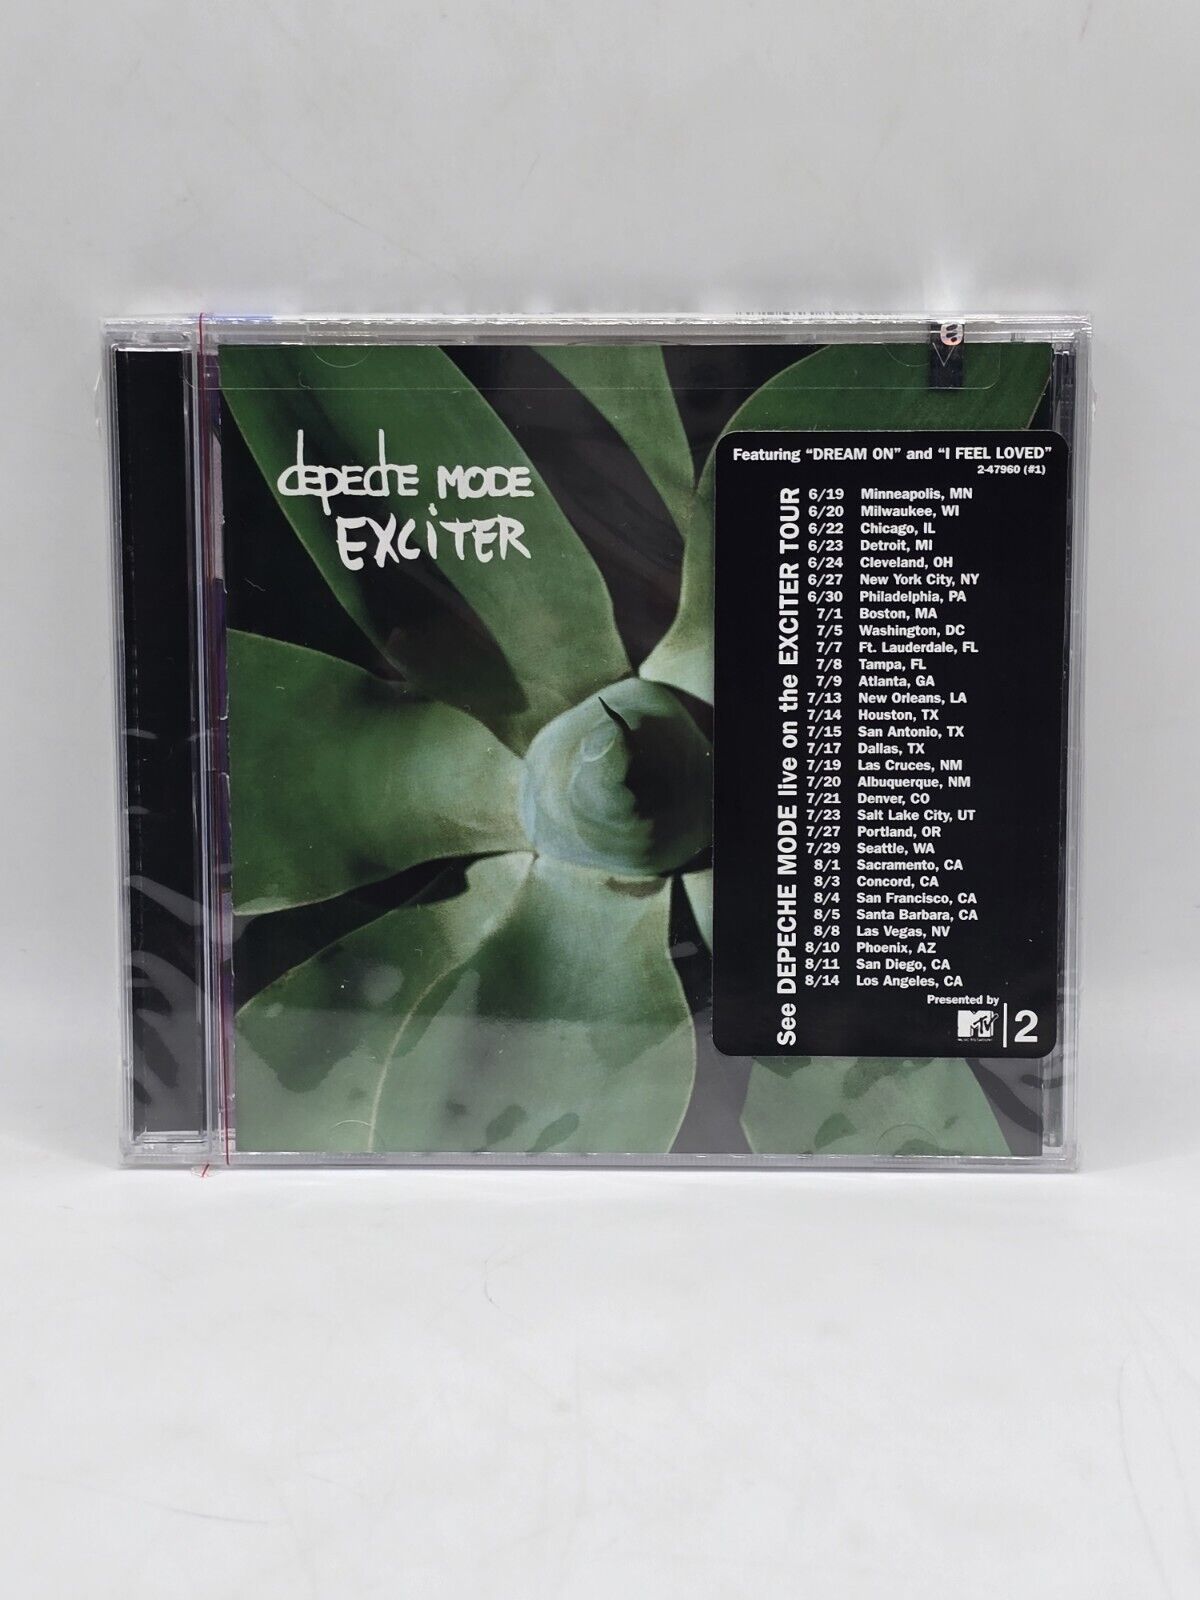 Exciter by Depeche Mode (CD, 2001) SEALED NEW 